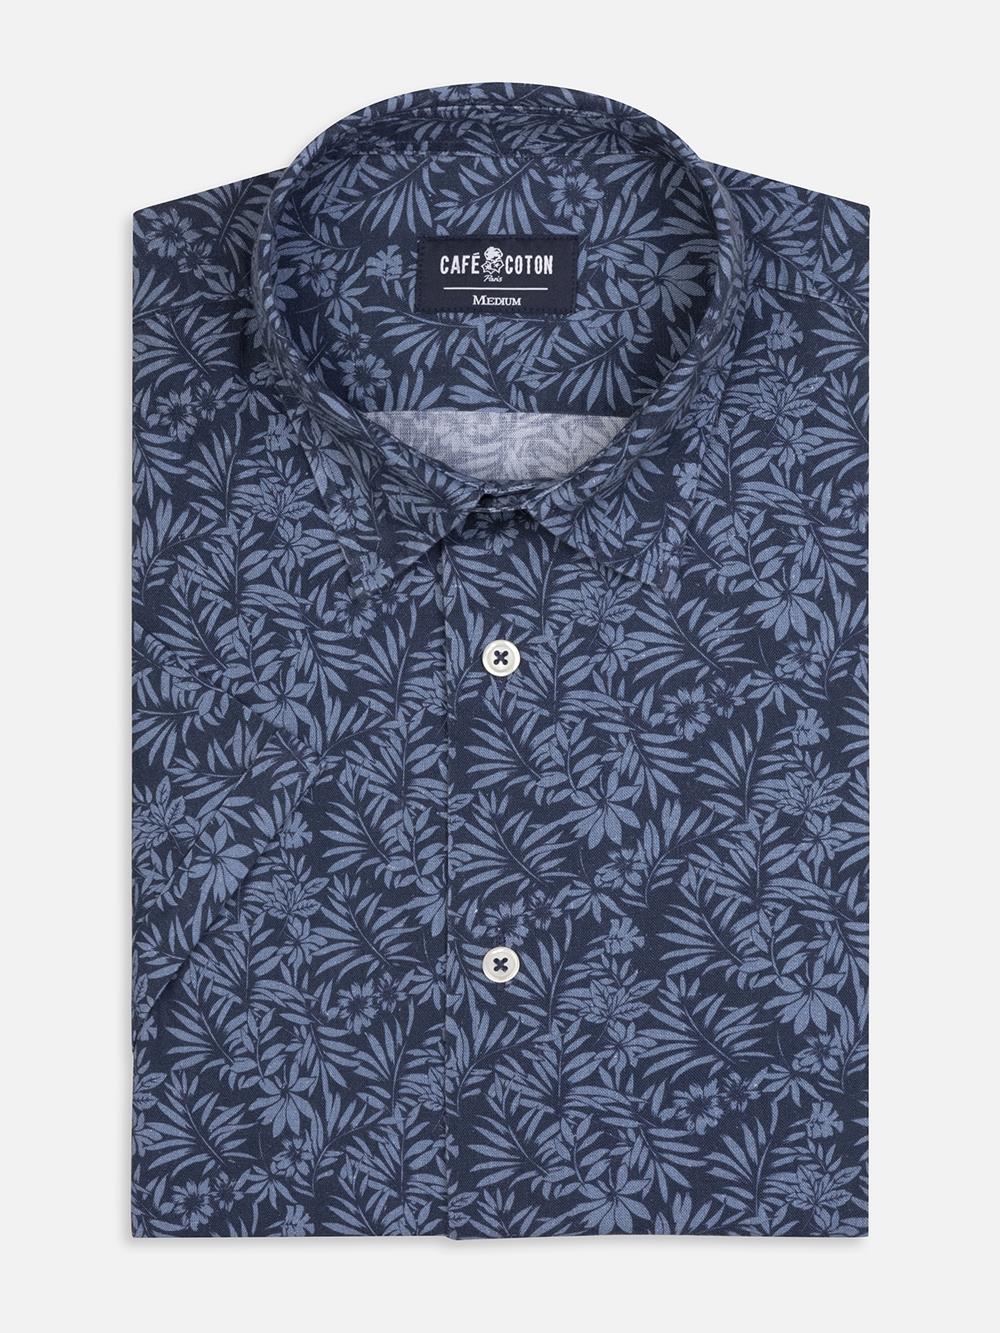 Spike shortsleeves shirt in navy linen with floral print 